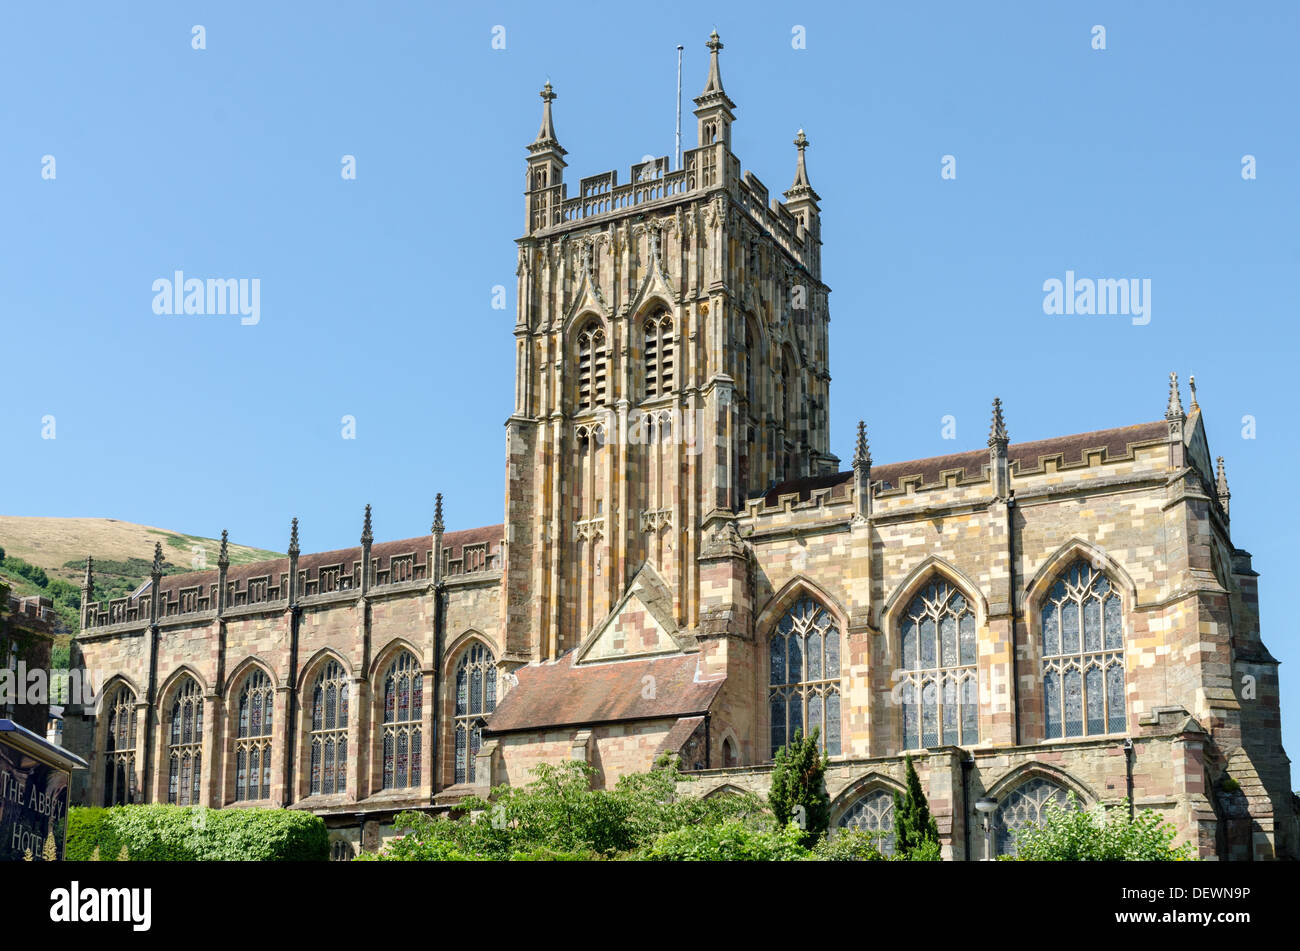 Great Malvern Priory in Malvern Worcestershire which was formerly Benedictine Monastary and is now Grade 1 listed Stock Photo